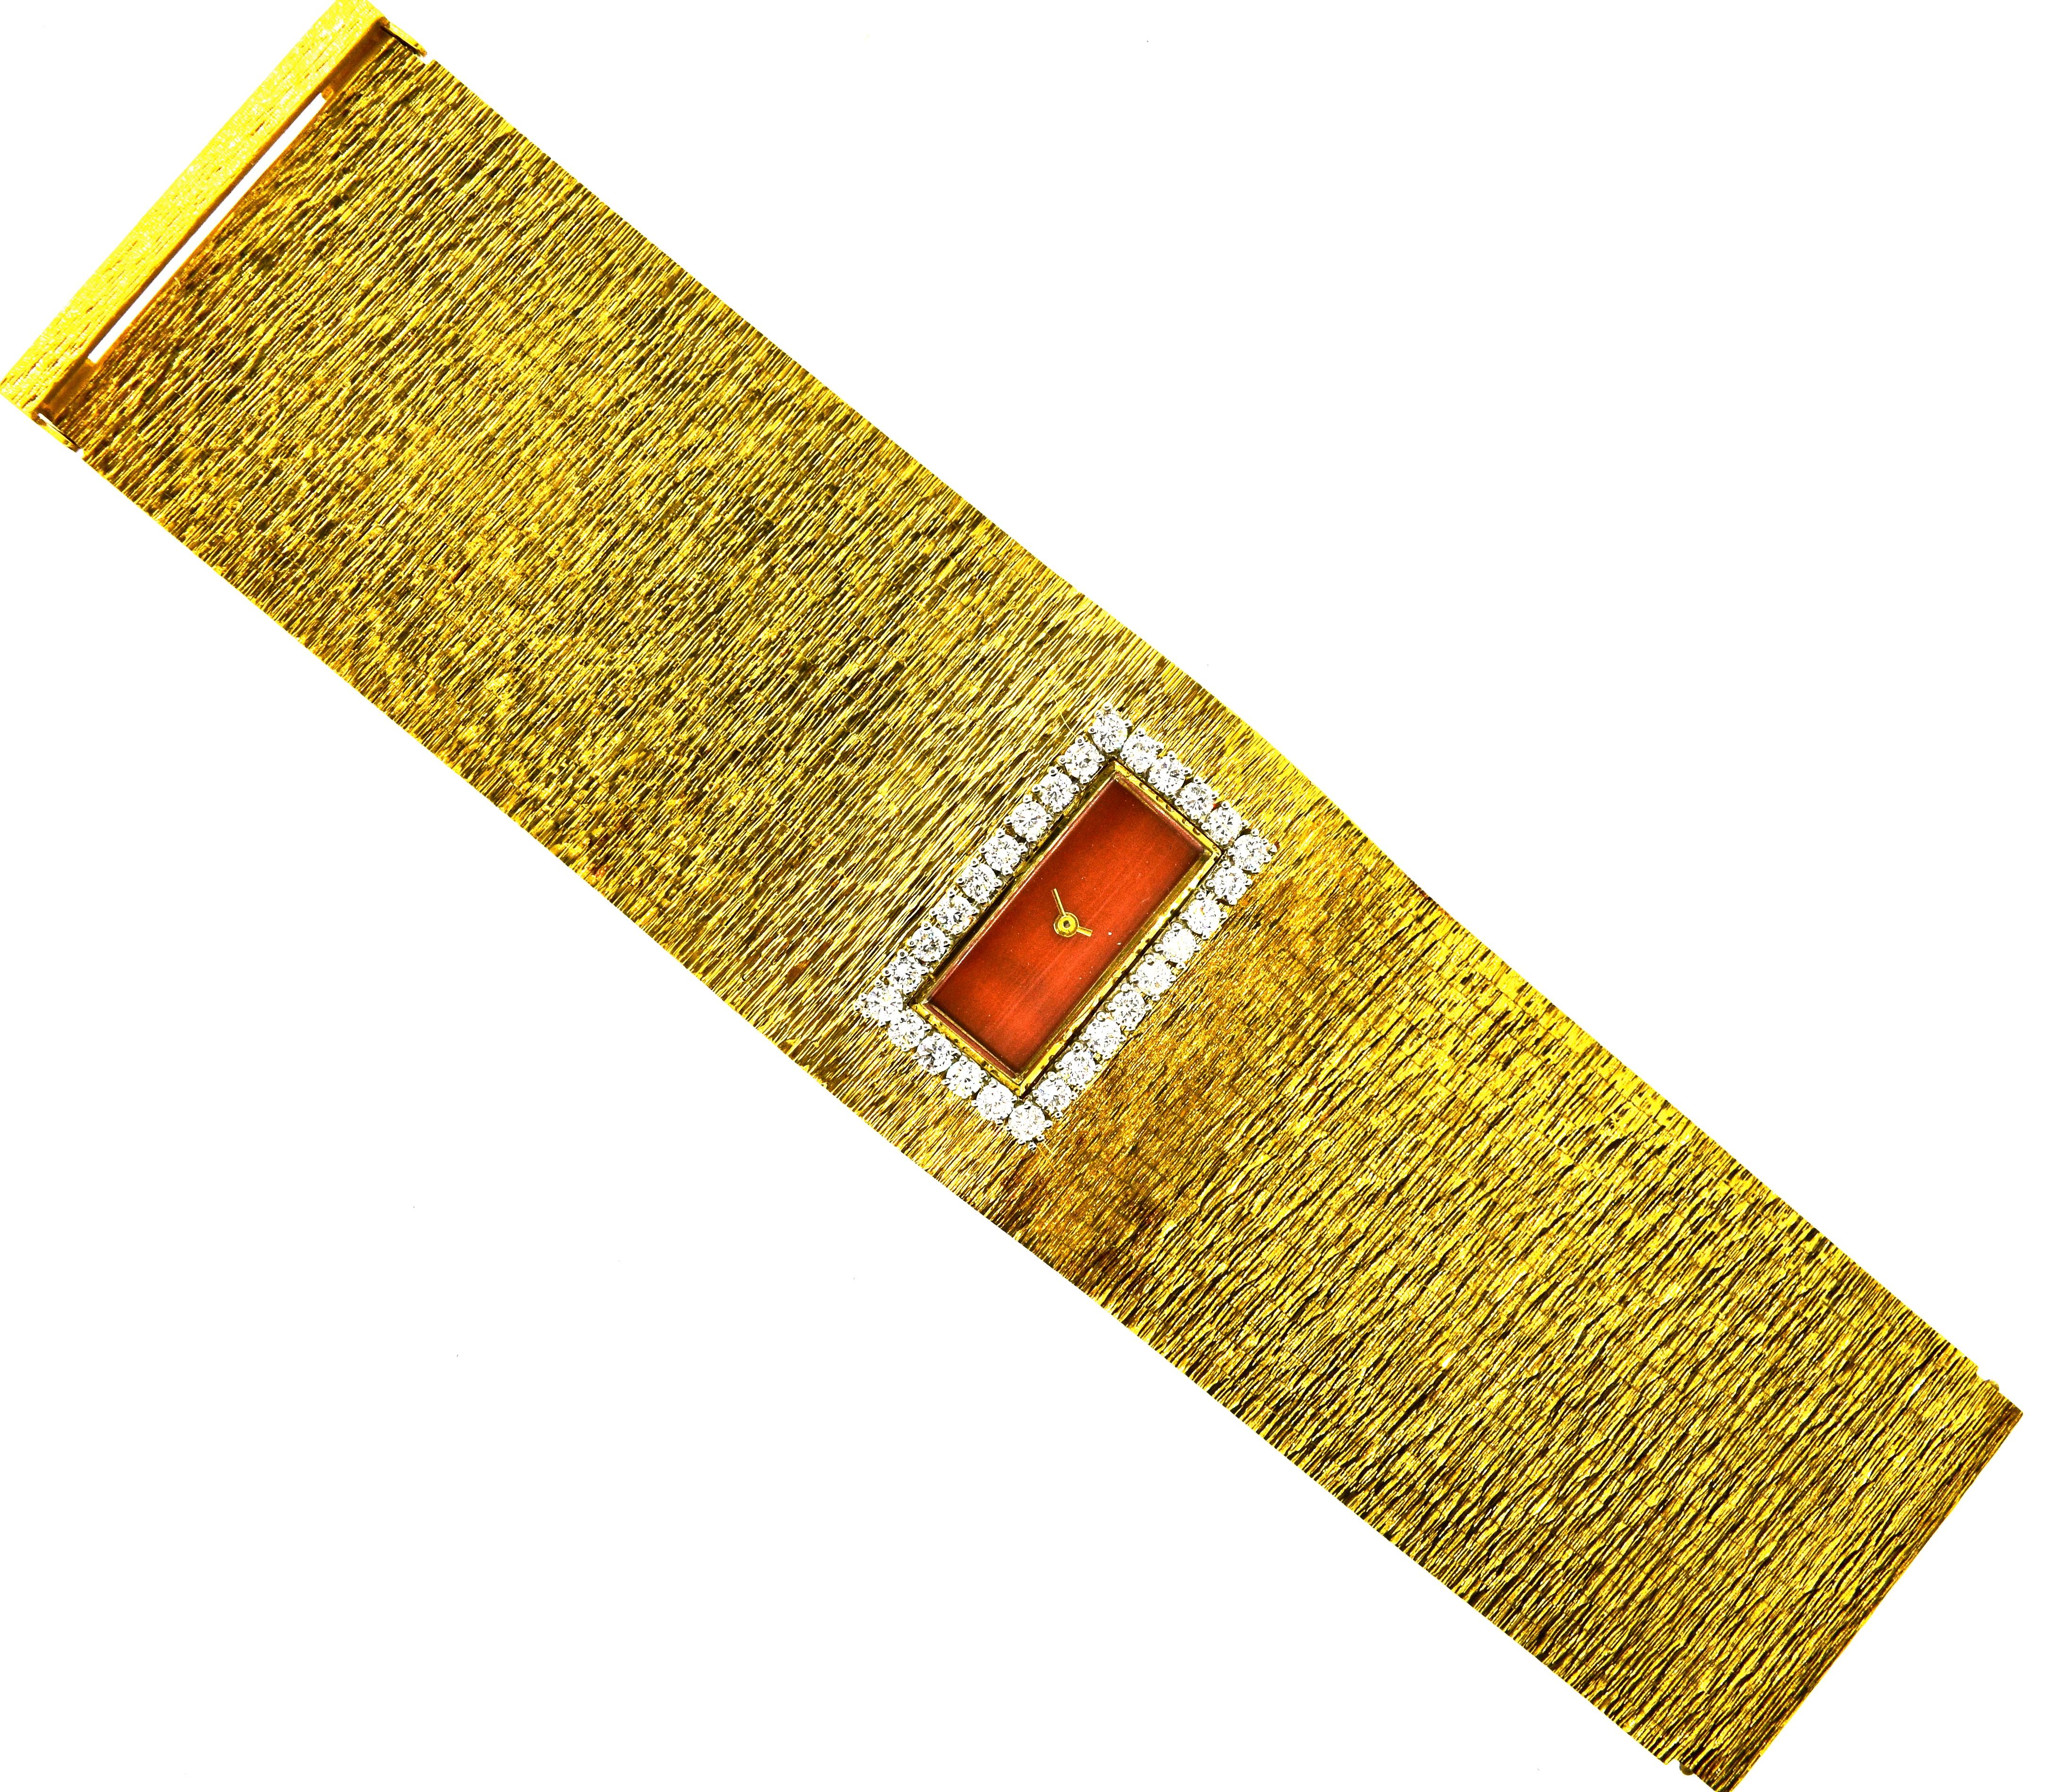 Bracelet with diamonds and a center watch by the London firm Milner.  This piece is a wide and bold  statement of bright gold and diamonds with a center coral dial watch.  This watch-bracelet is a bright yellow gold statement, it is 9K (marked 375).